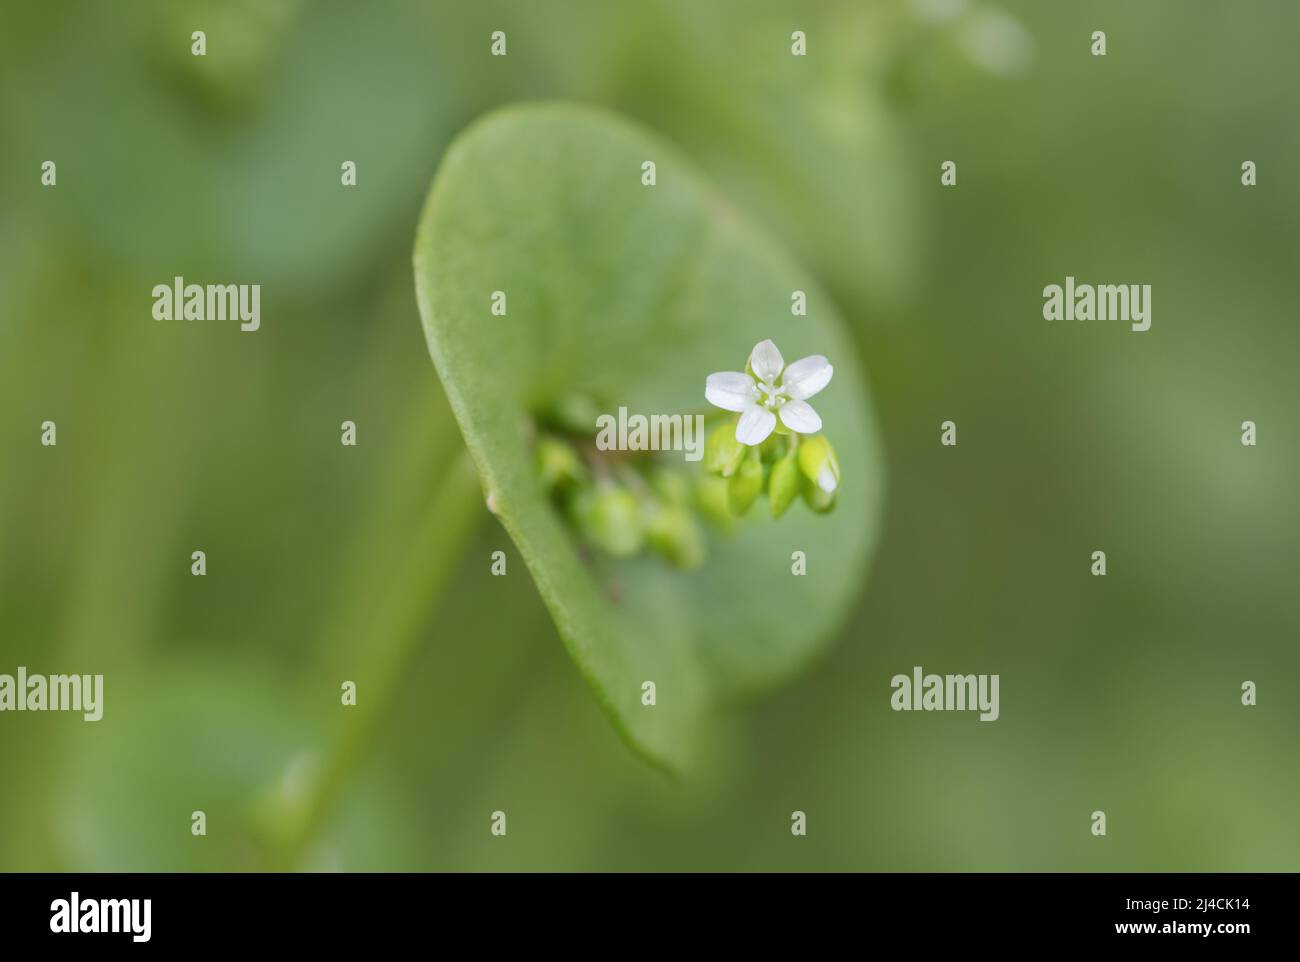 Miner's lettuce (Claytonia perfoliata), growing in the garden and flowering, close-up, Diersfordt, Germany Stock Photo